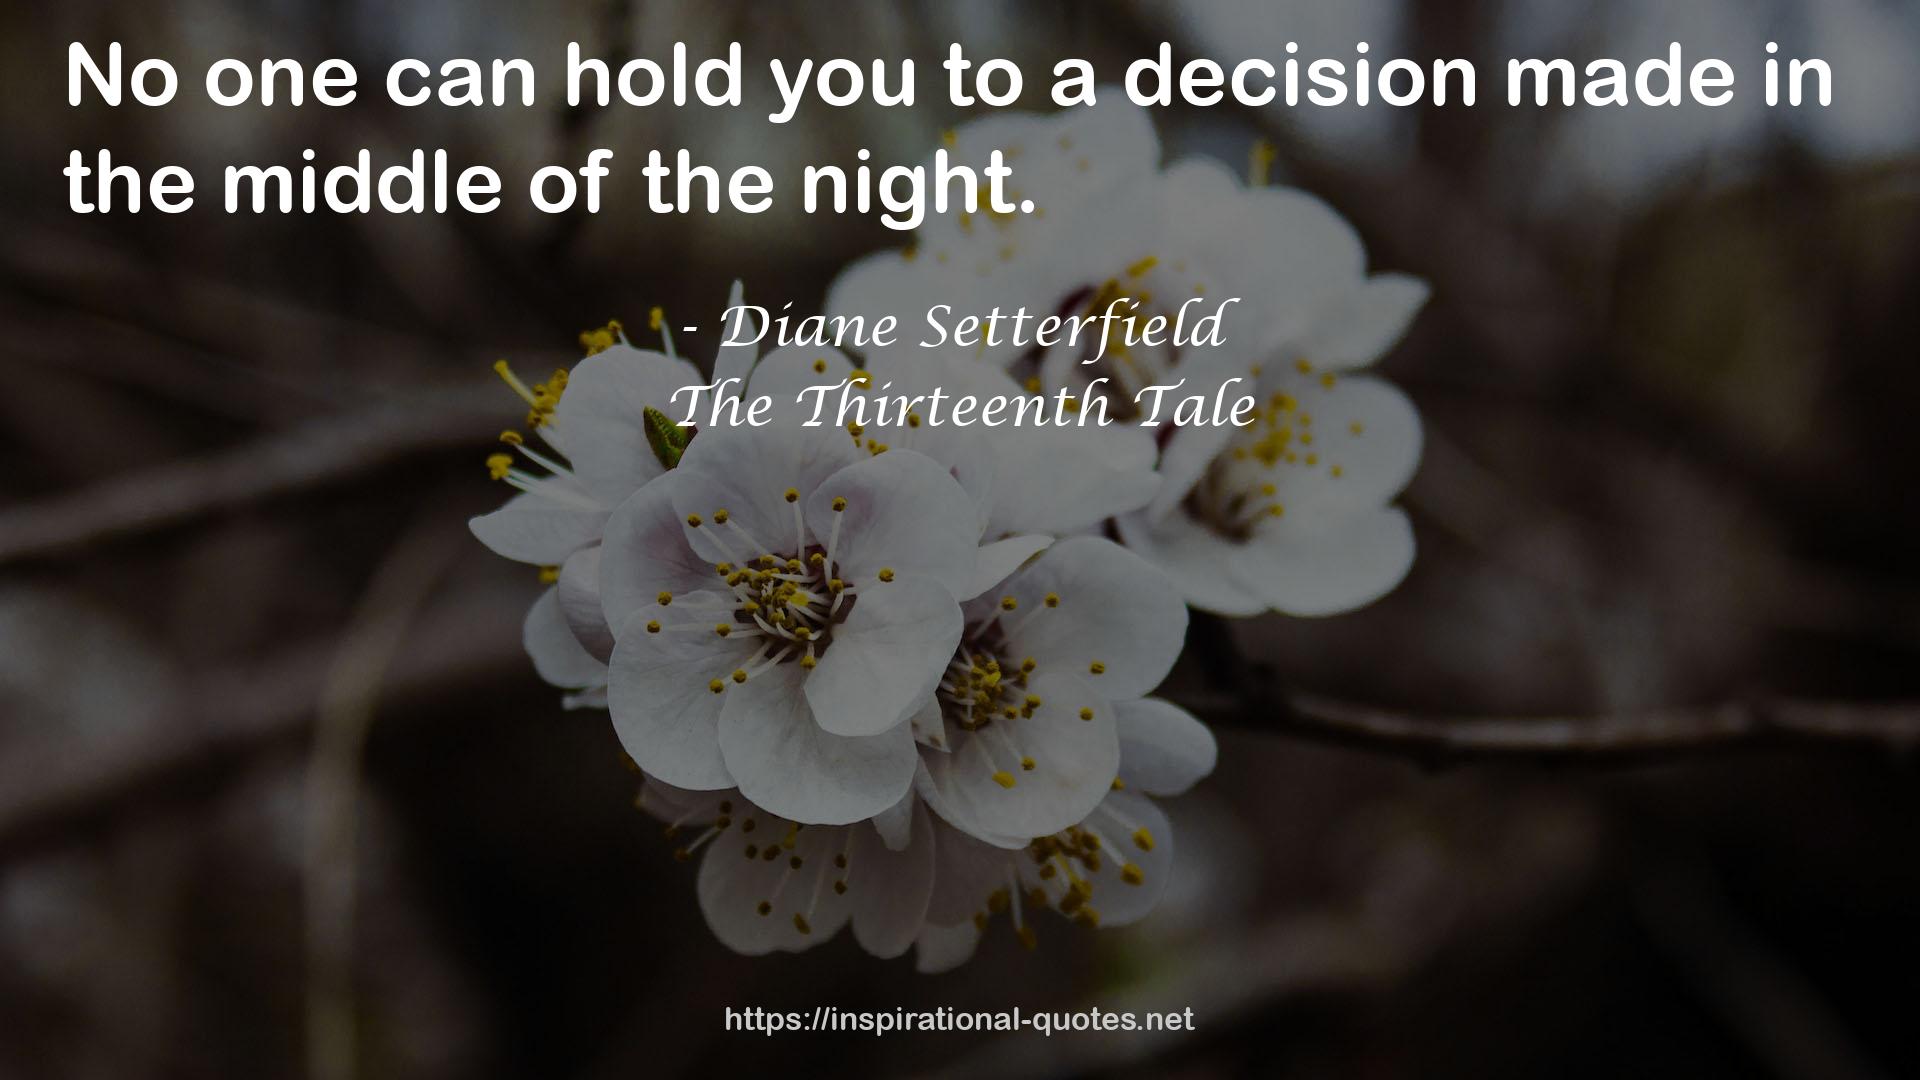 Diane Setterfield quote : No one can hold you to a decision made in the middle of the night.